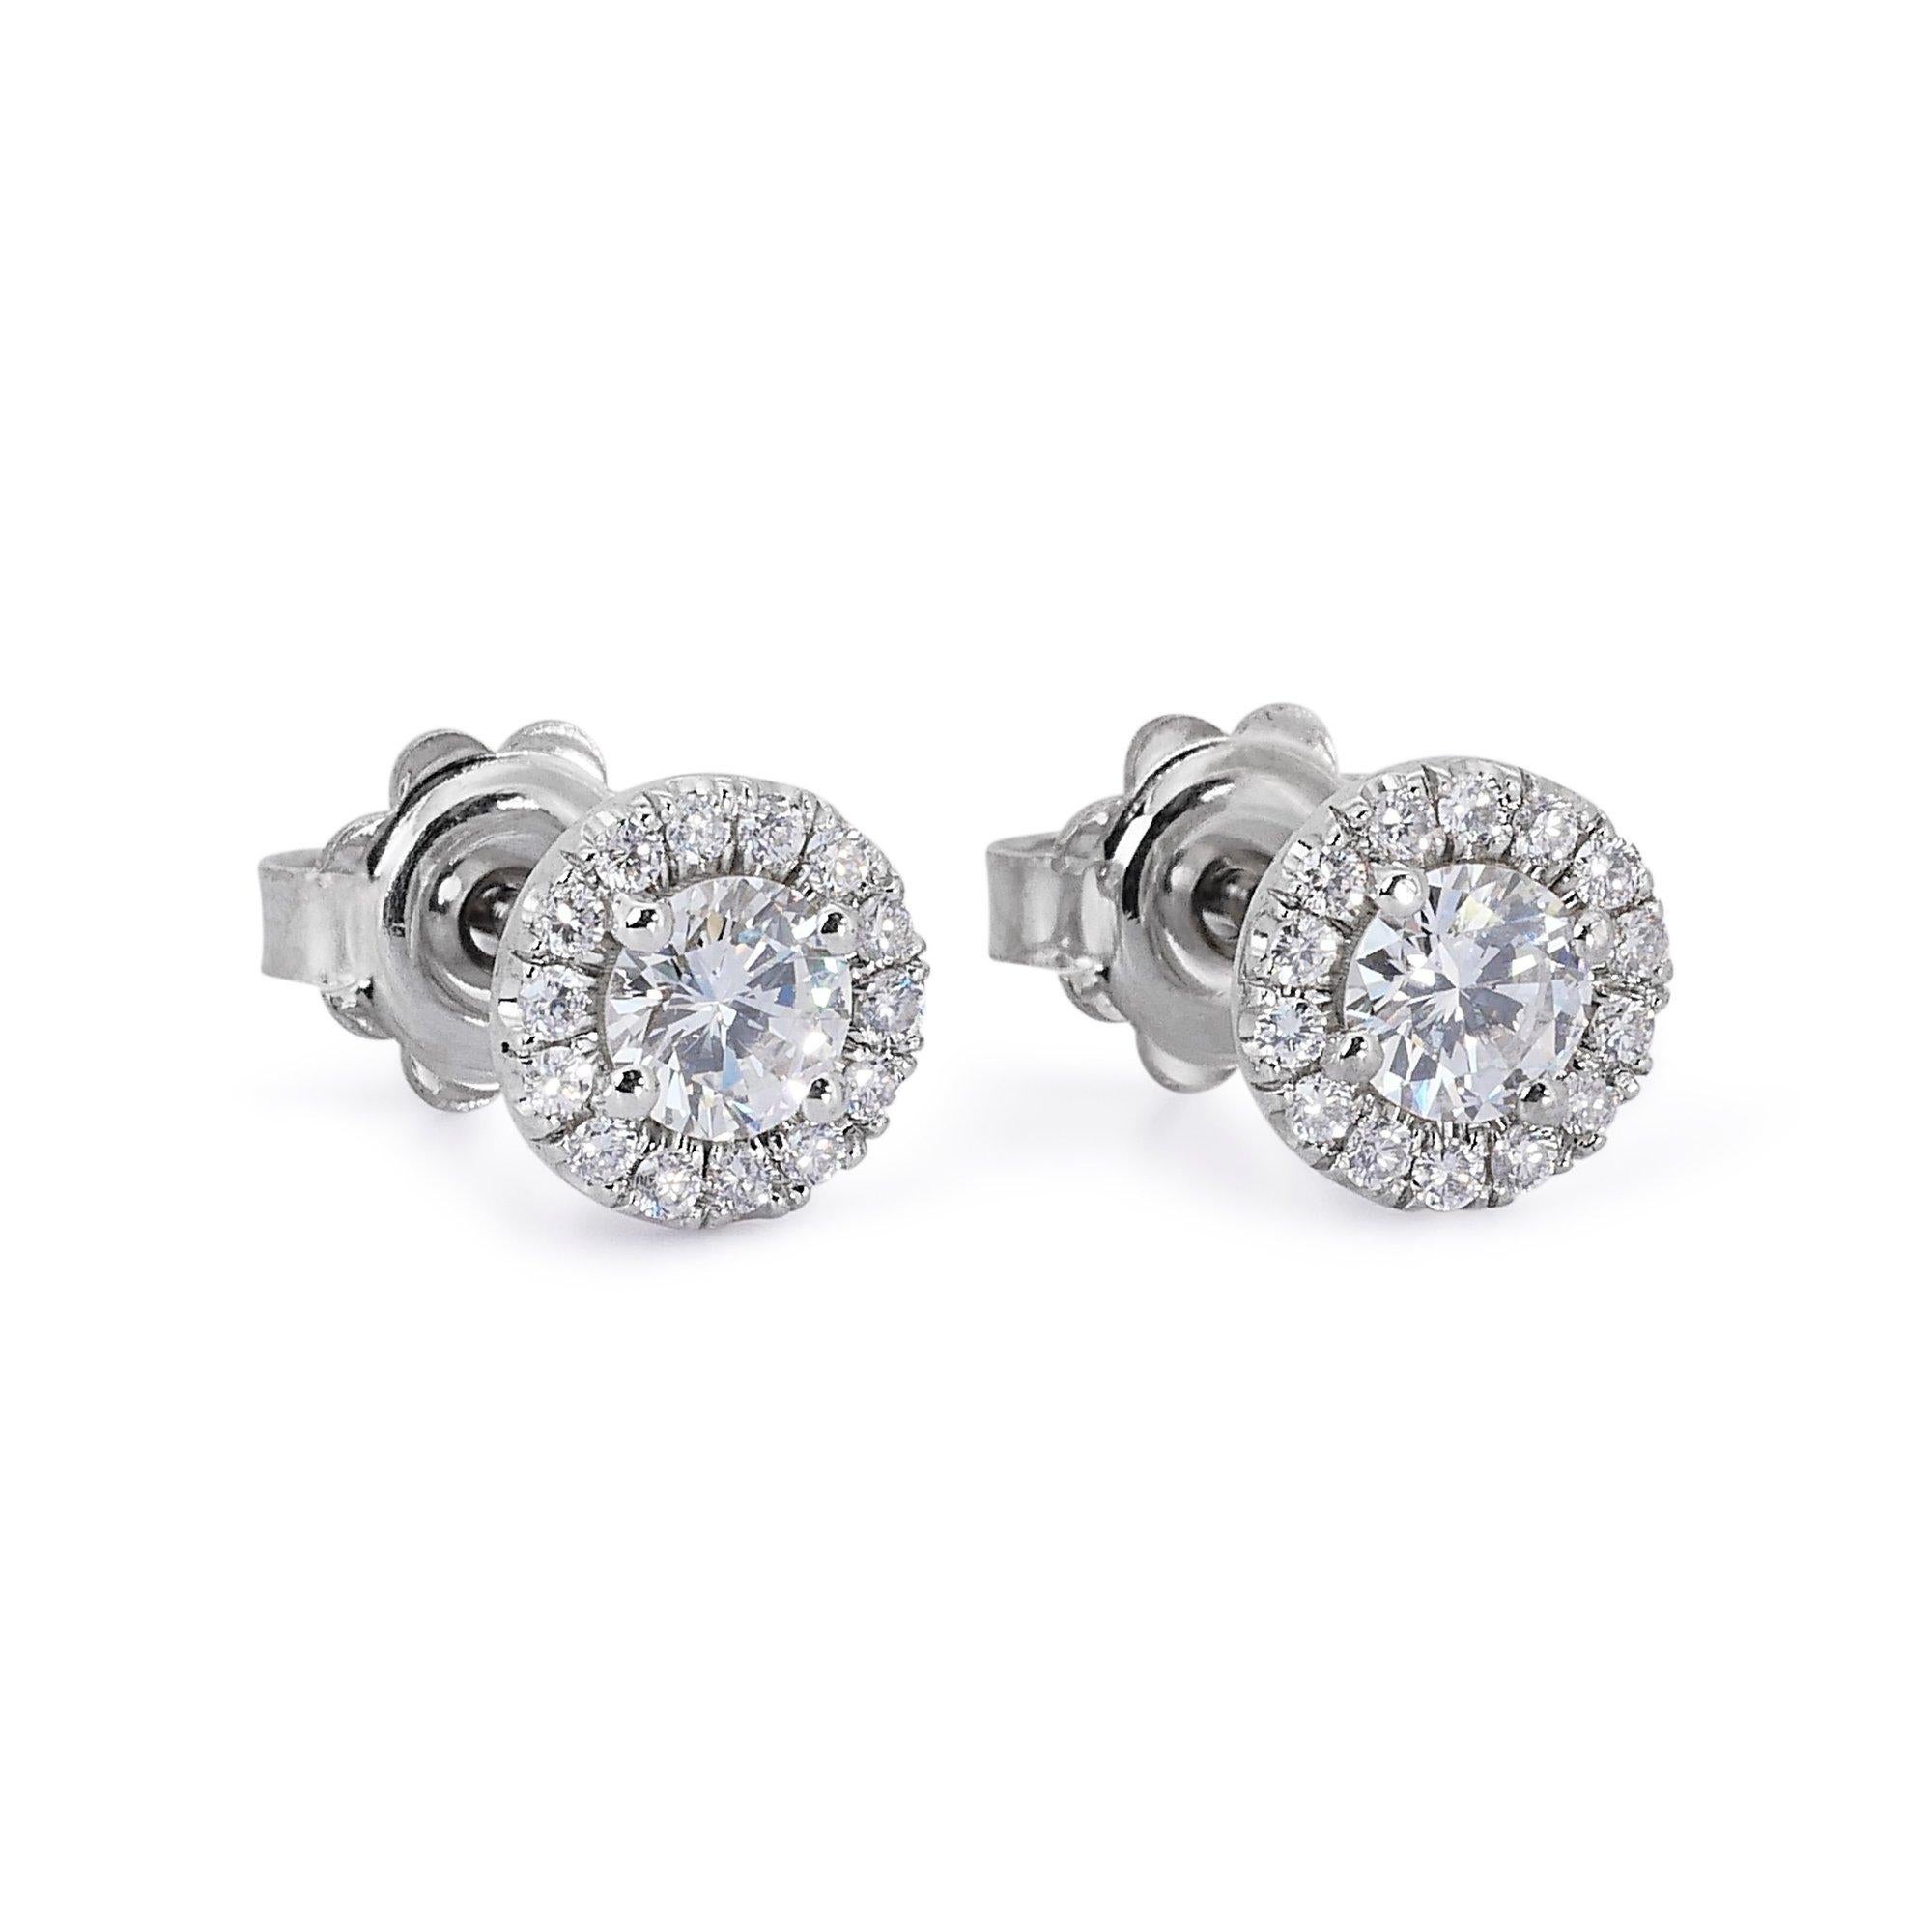 Round Cut Luxurious 1.24ct Round Diamond Stud Earrings in 18K White Gold - GIA Certified For Sale